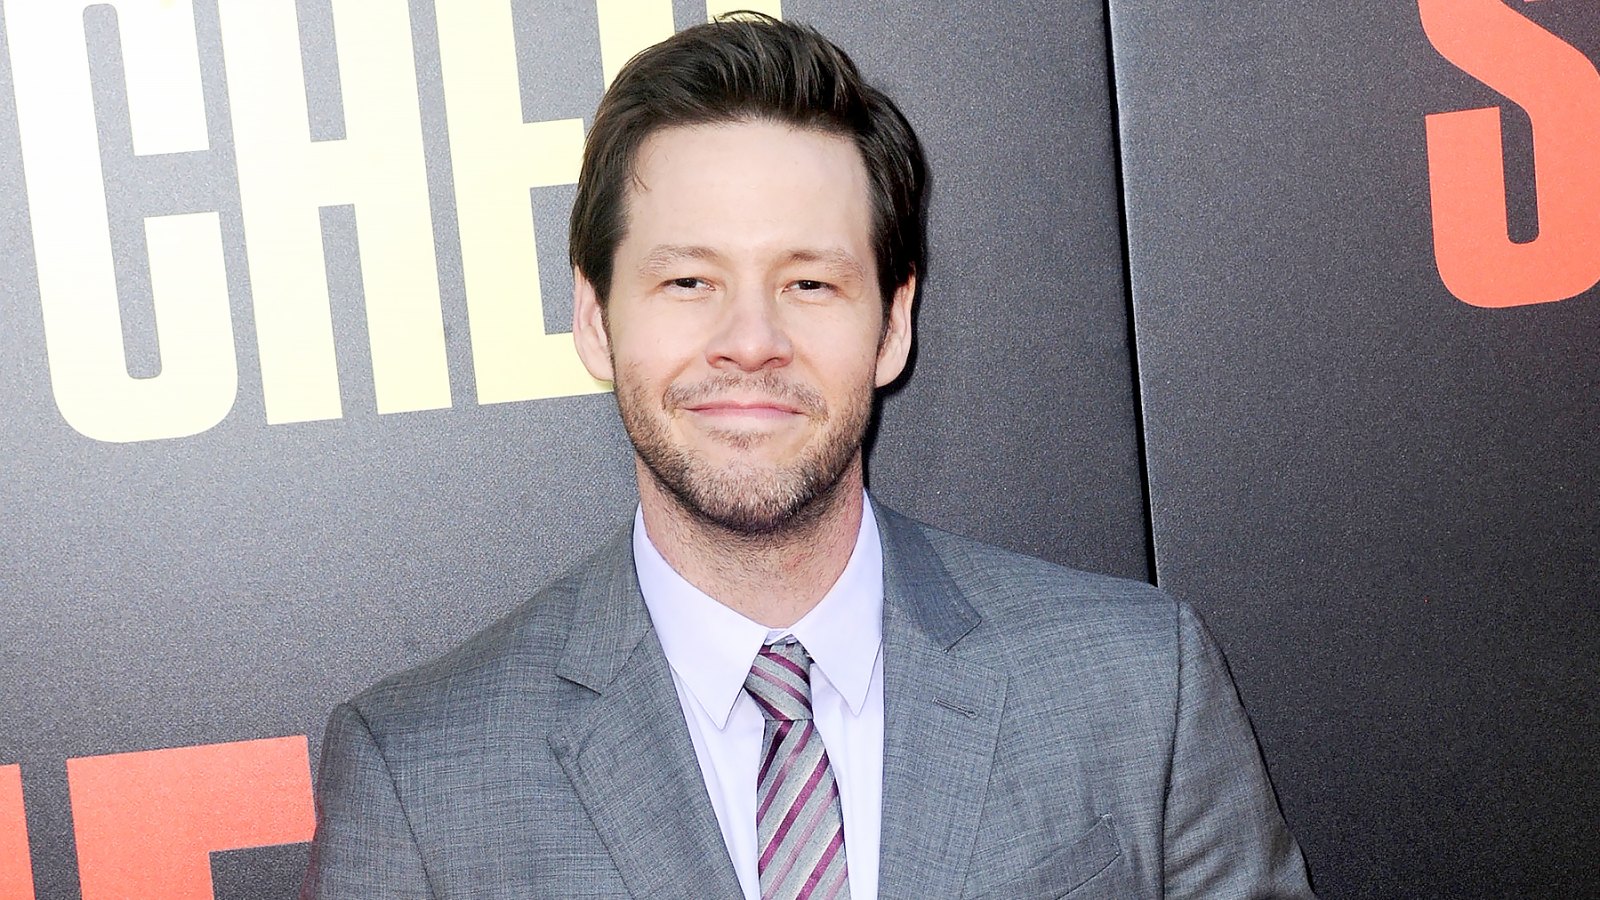 Ike Barinholtz arrives for the Premiere Of 20th Century Fox's "Snatched" held at Regency Village Theatre on May 10, 2017 in Westwood, California.